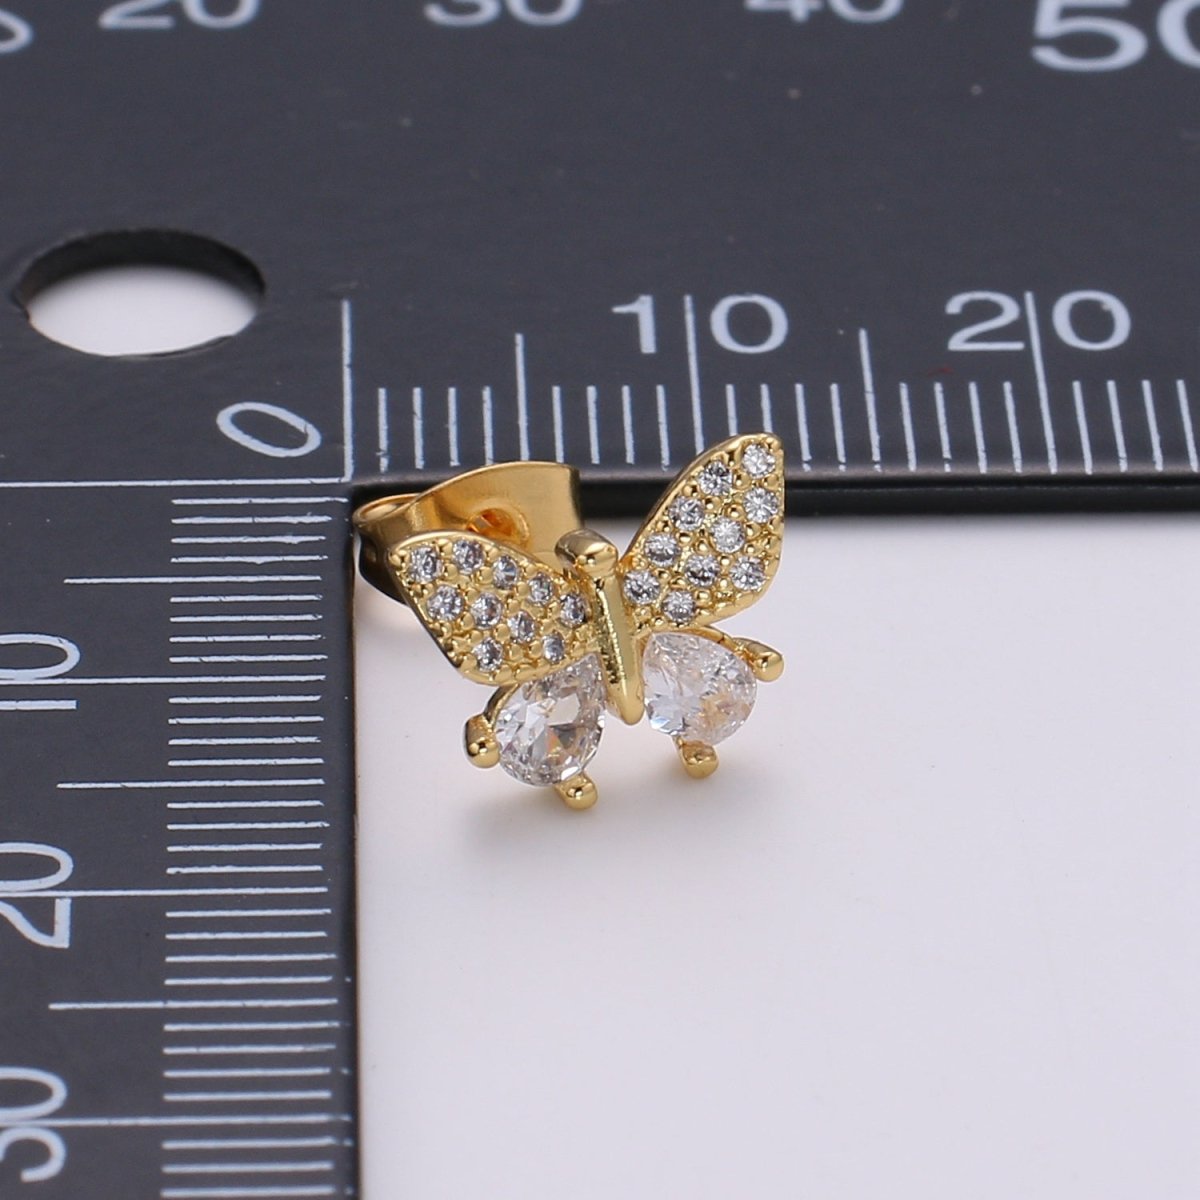 Tiny Golden Butterfly Stud Earrings CZ Mini Gold Filled Mariposa Animal Nature Formal/Casual Daily Wear Earring Jewelry P-021 - DLUXCA